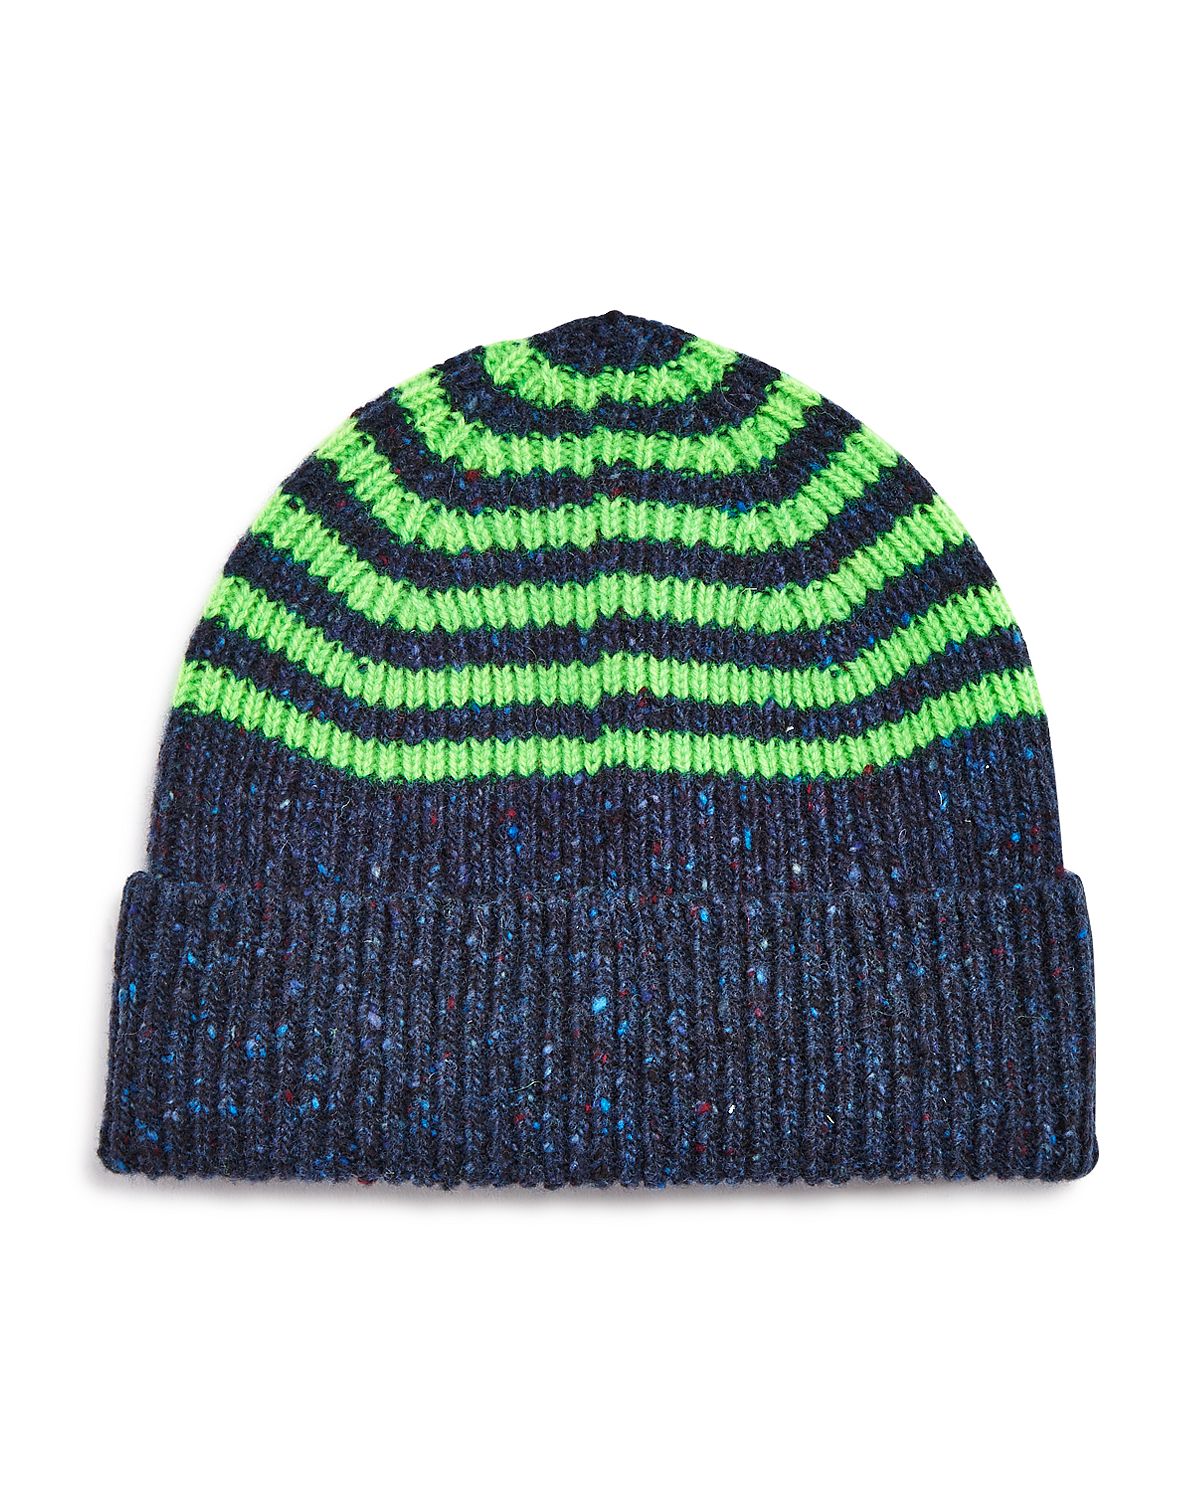 Paul Smith Neon-striped Beanie Blue and Green